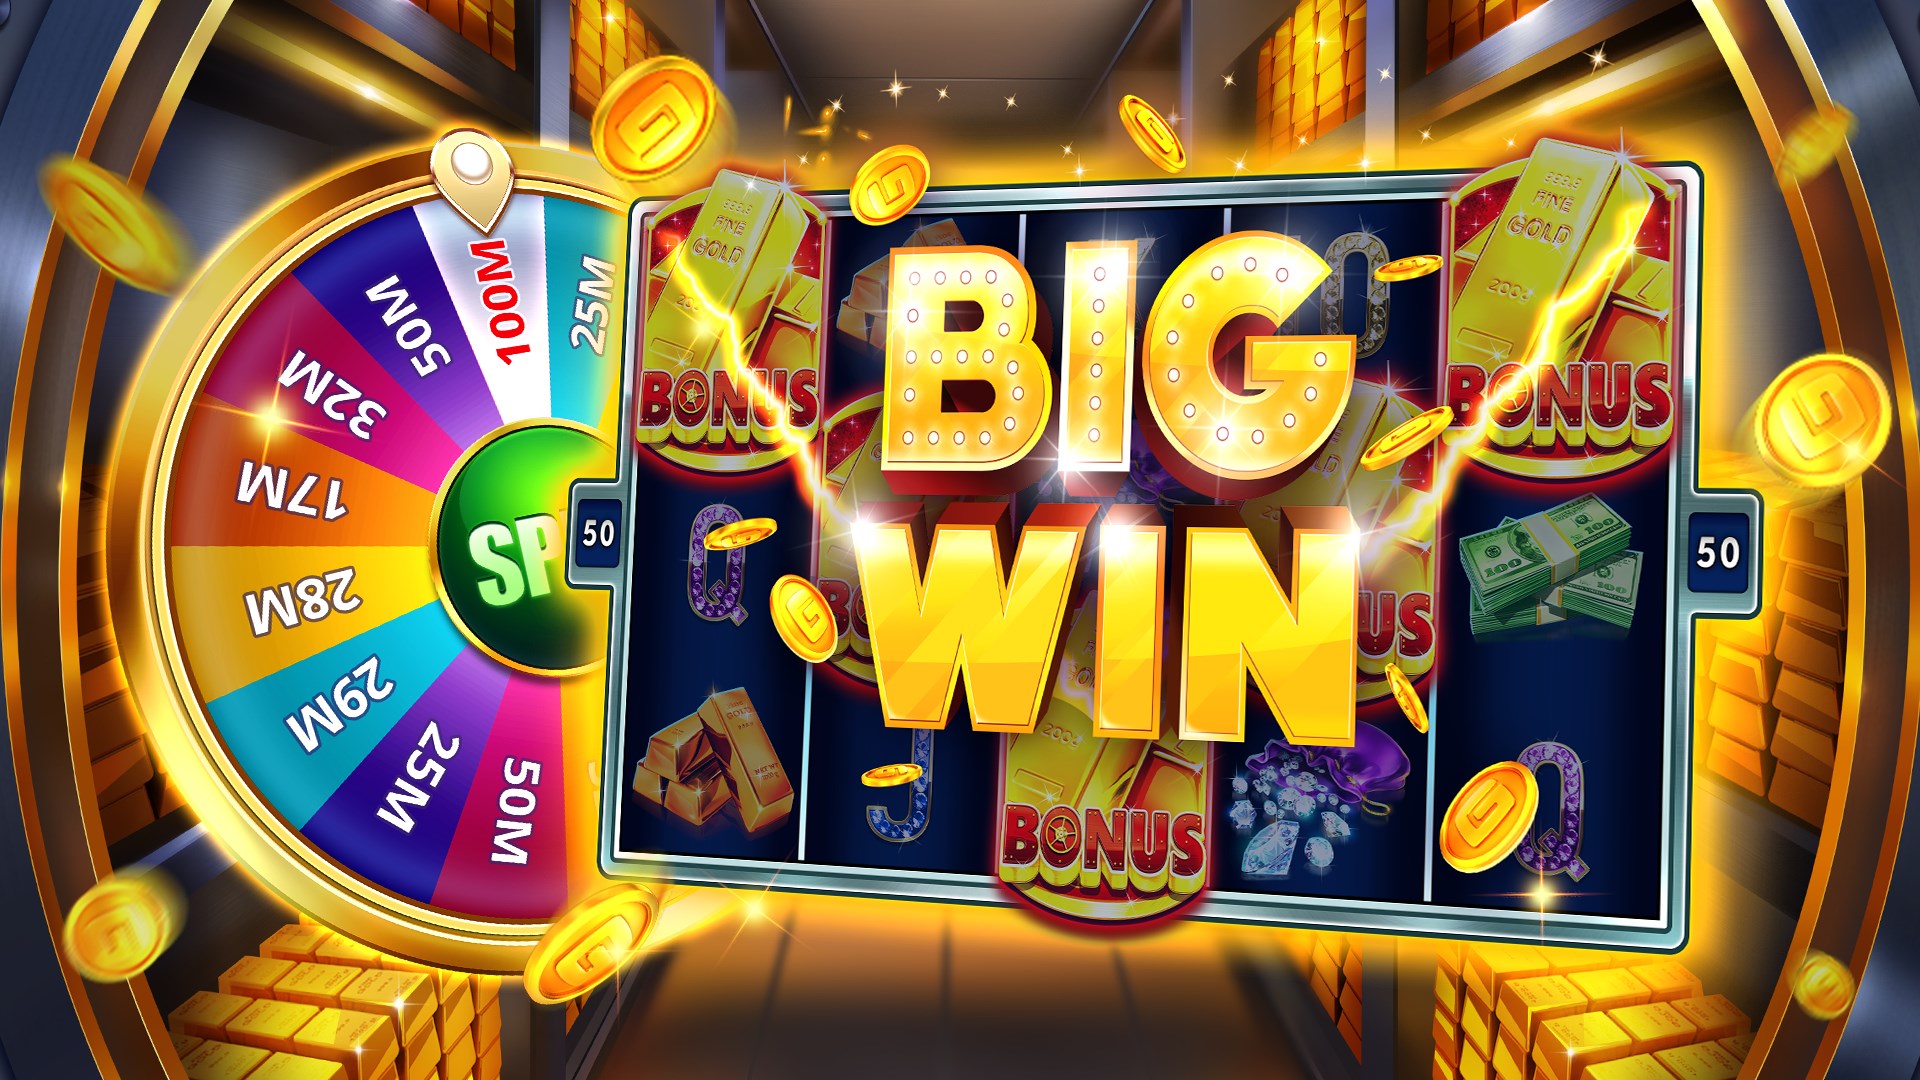 real casino slots online Explained